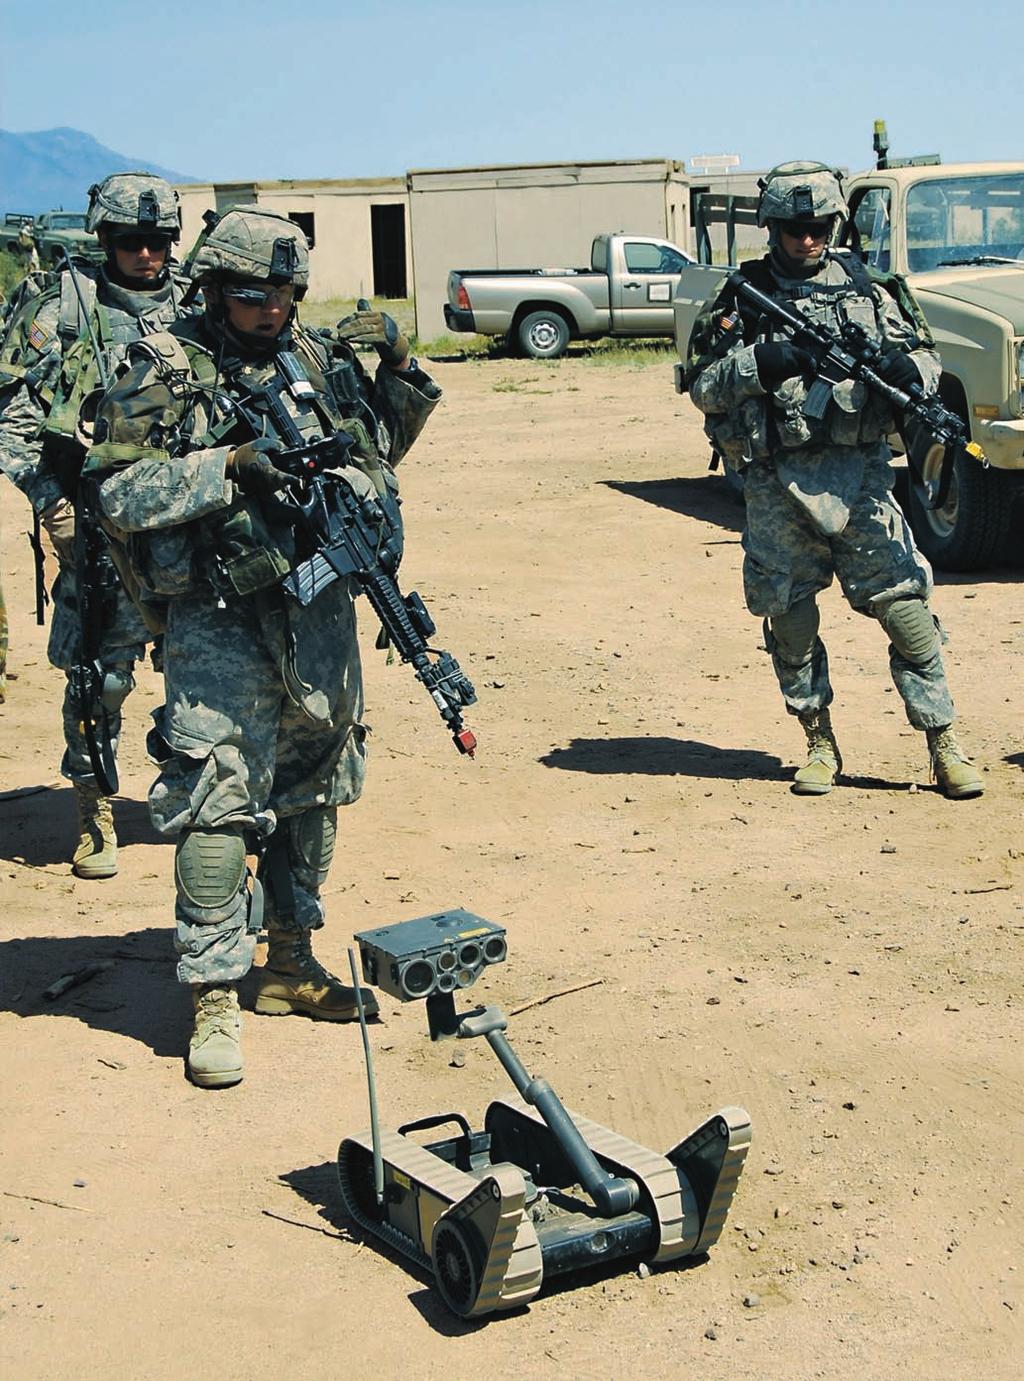 SPC Joshua Whiteland, Company C, 2nd Combined Arms Battalion, maneuvers a small unmanned ground vehicle (SUGV) Block 1 during village operations. Scott R.